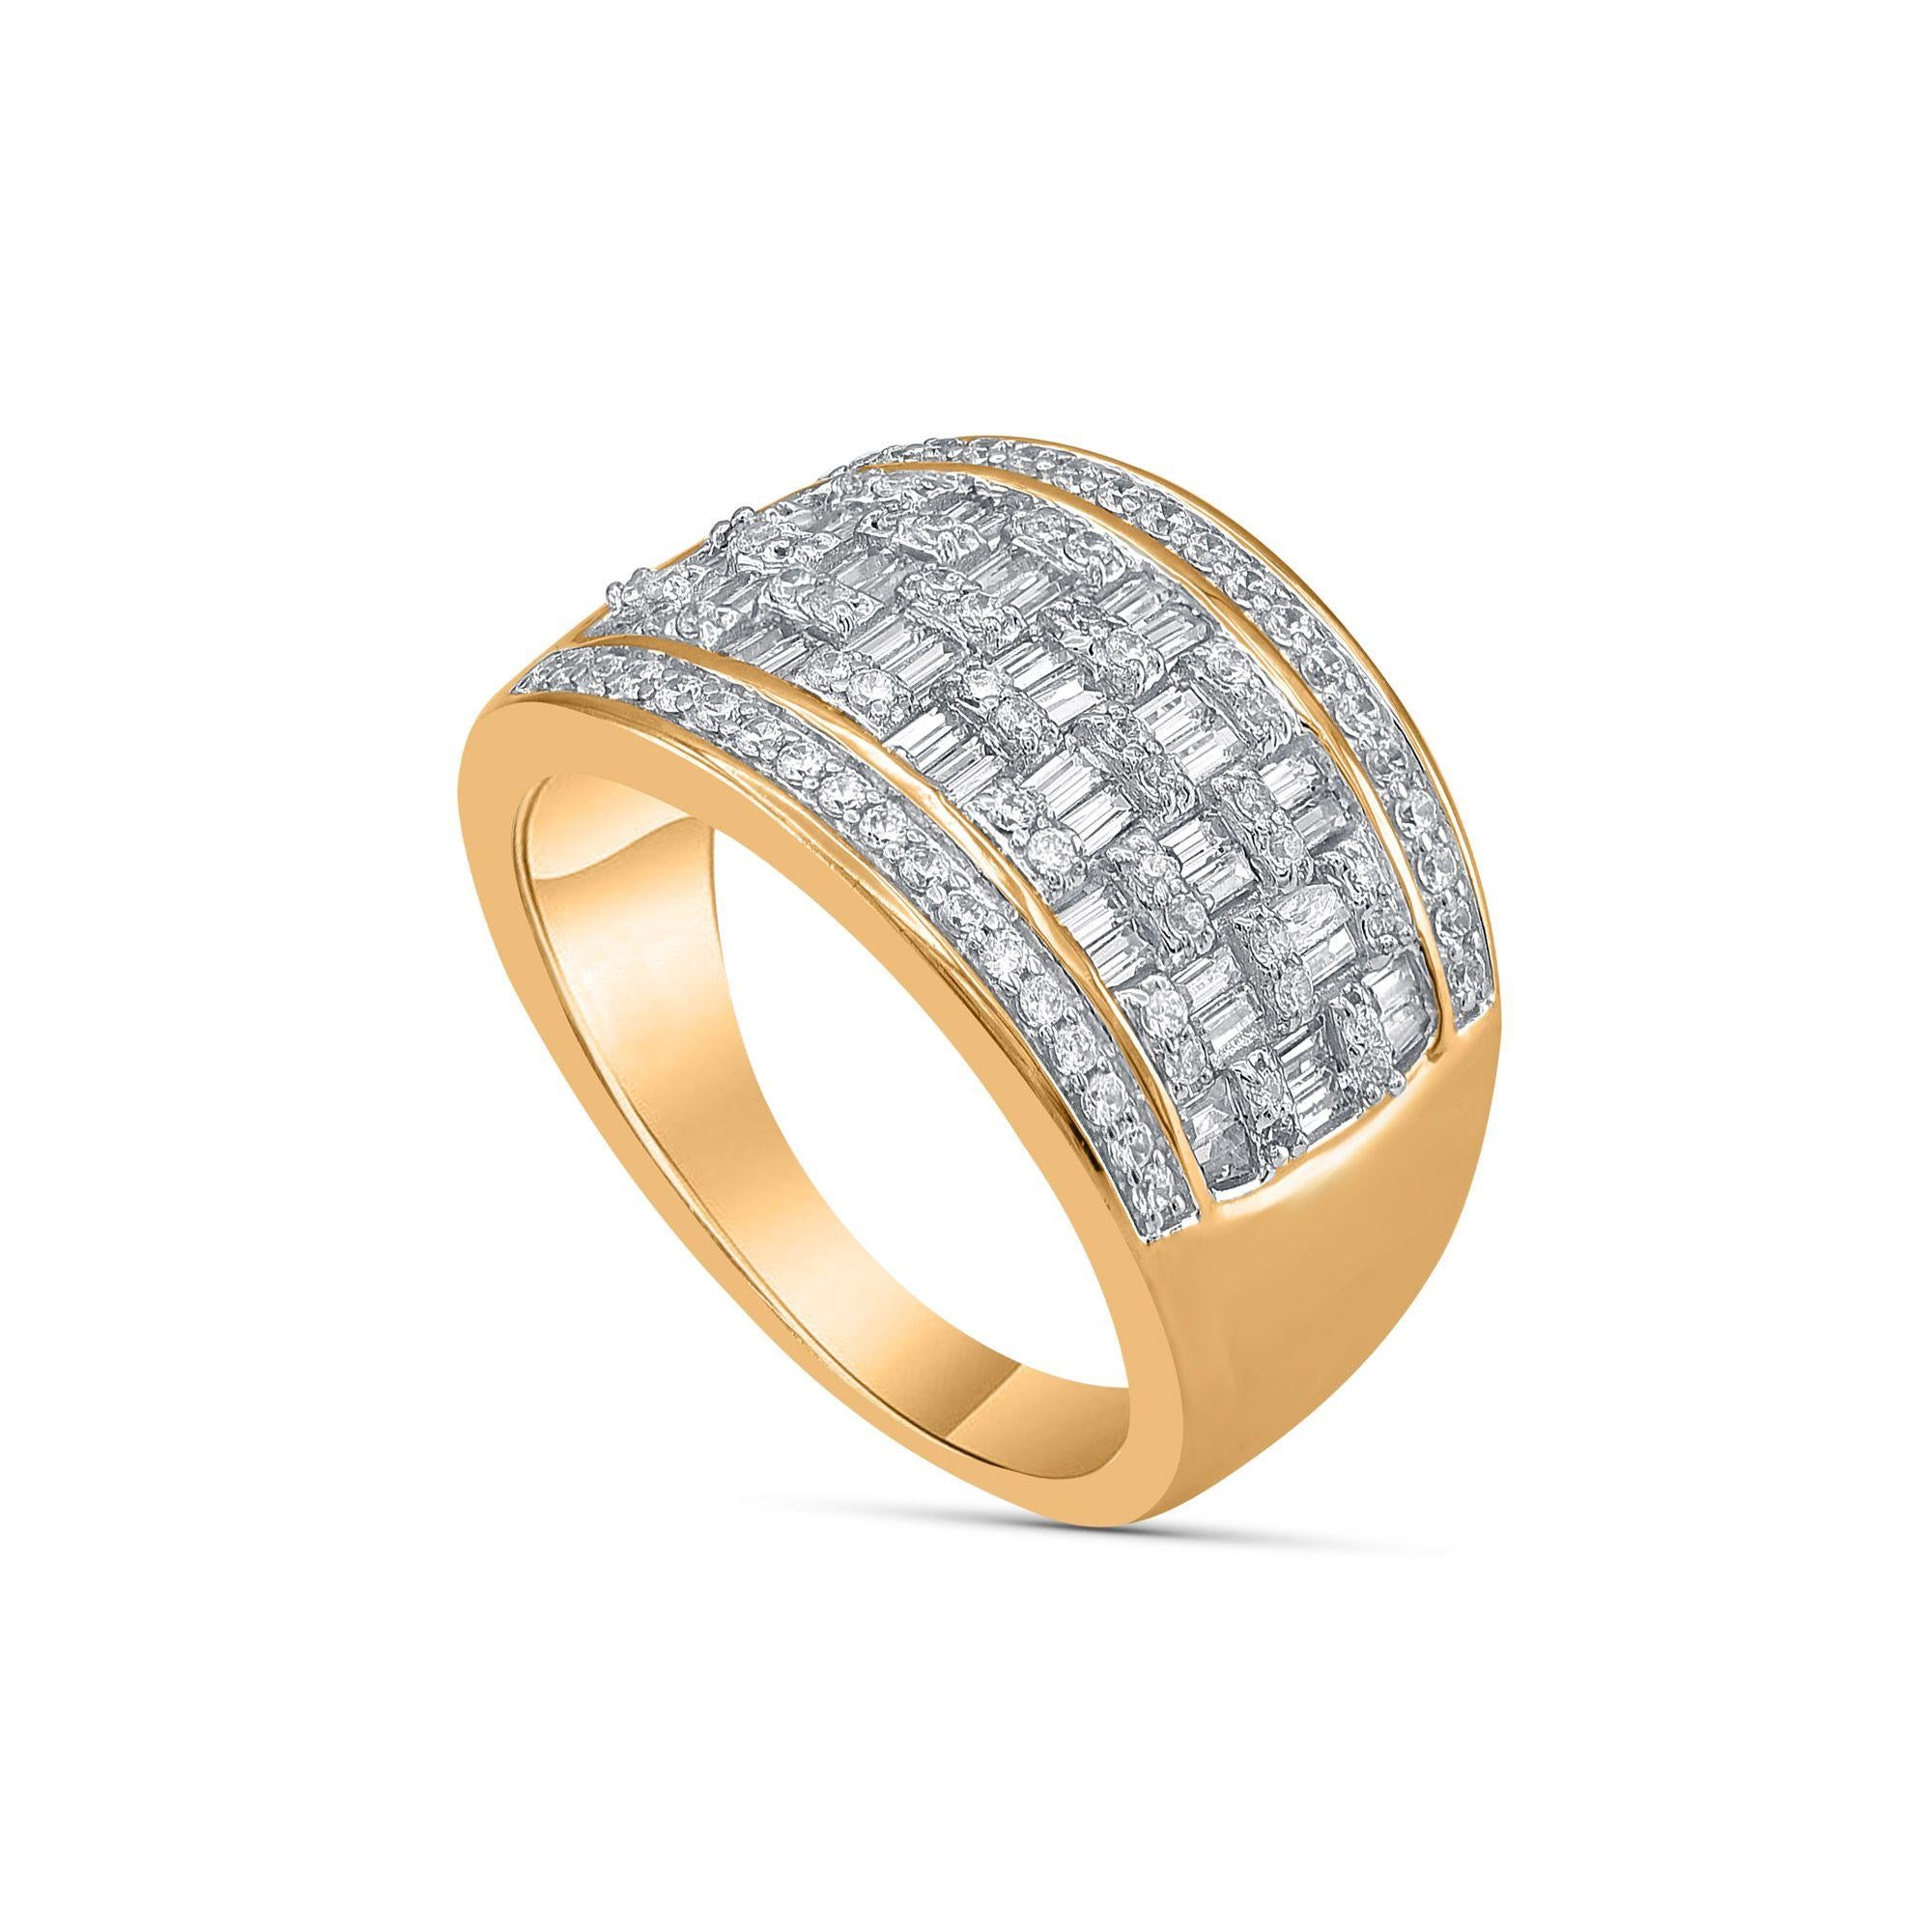 Made in 10 kt yellow gold and accentuated with 46 baguettes and 80 round-cut diamonds in prong, pave and channel setting, diamonds are graded H-I Color, I2 Clarity. 


